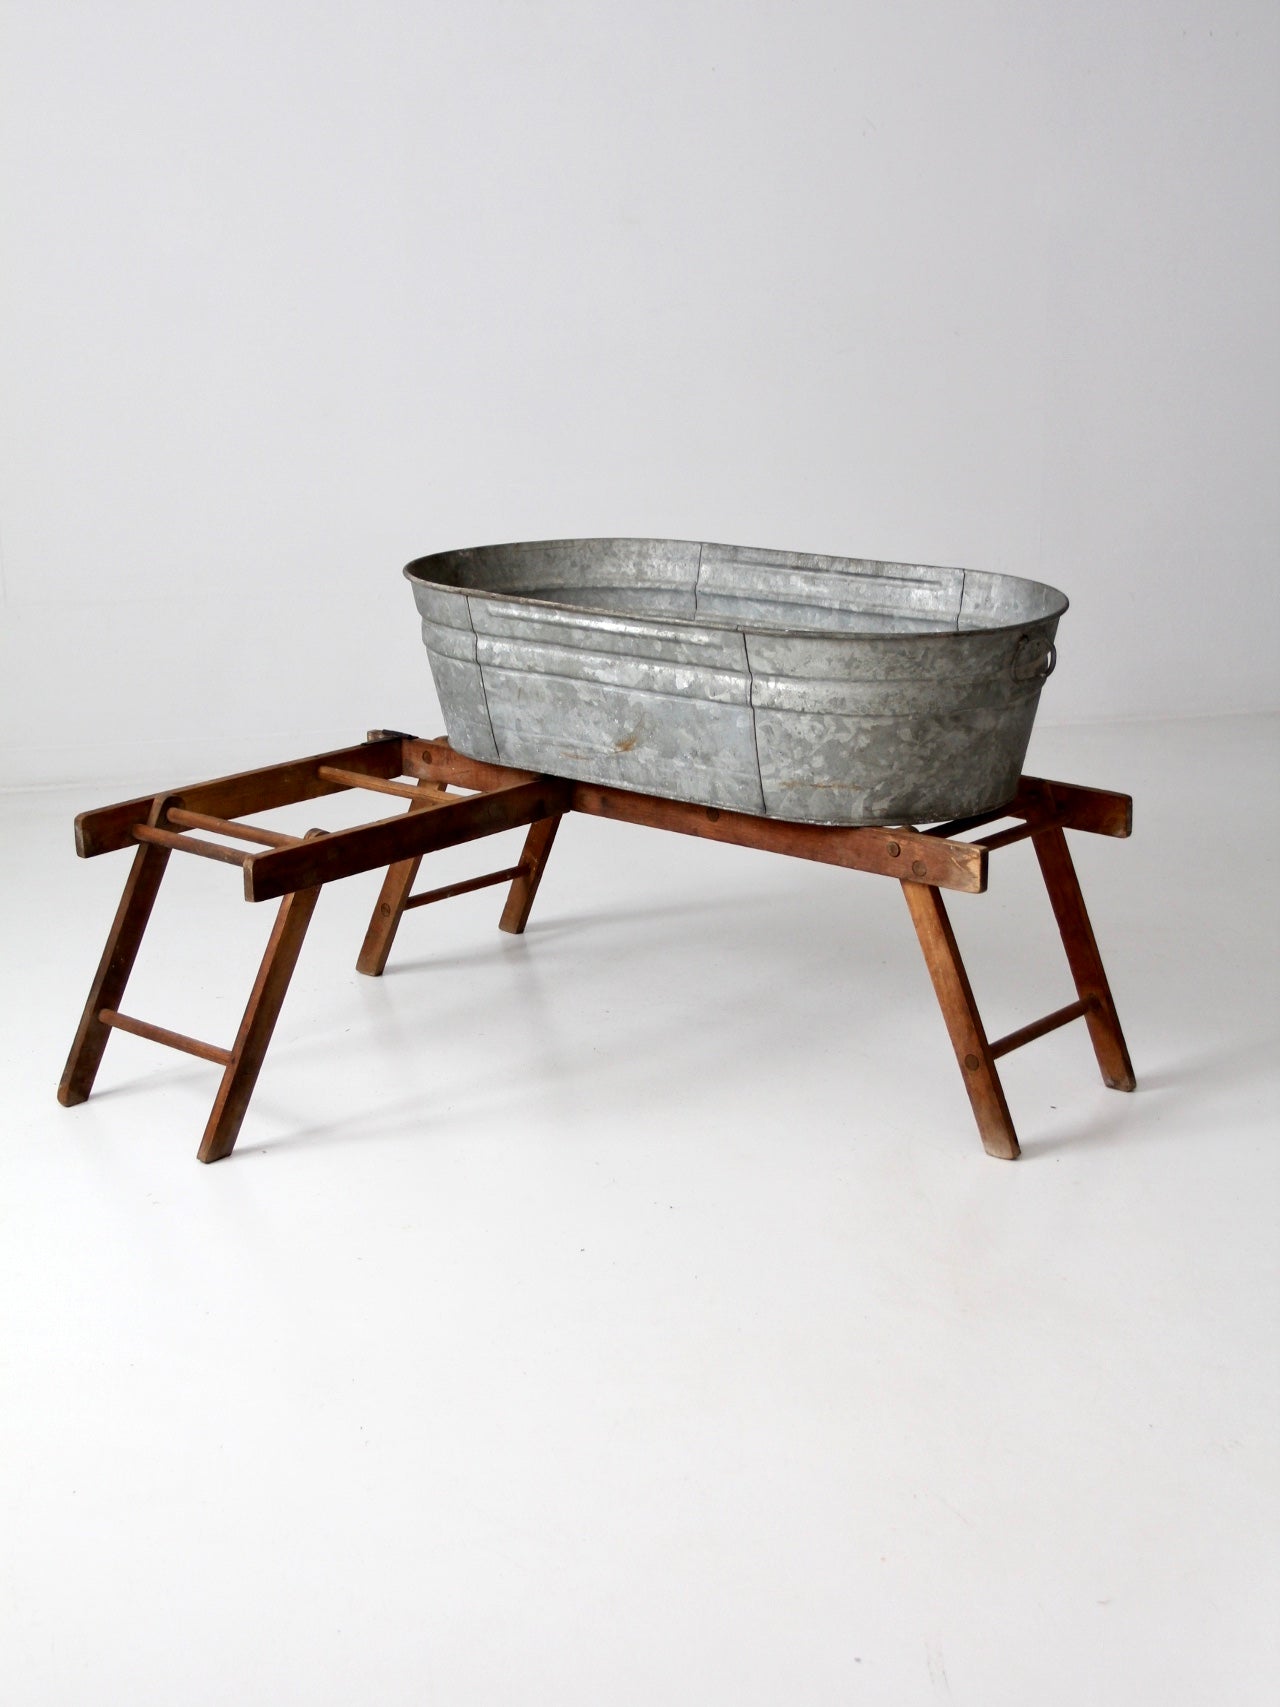 antique laundry stand with galvanized tub – 86 Vintage